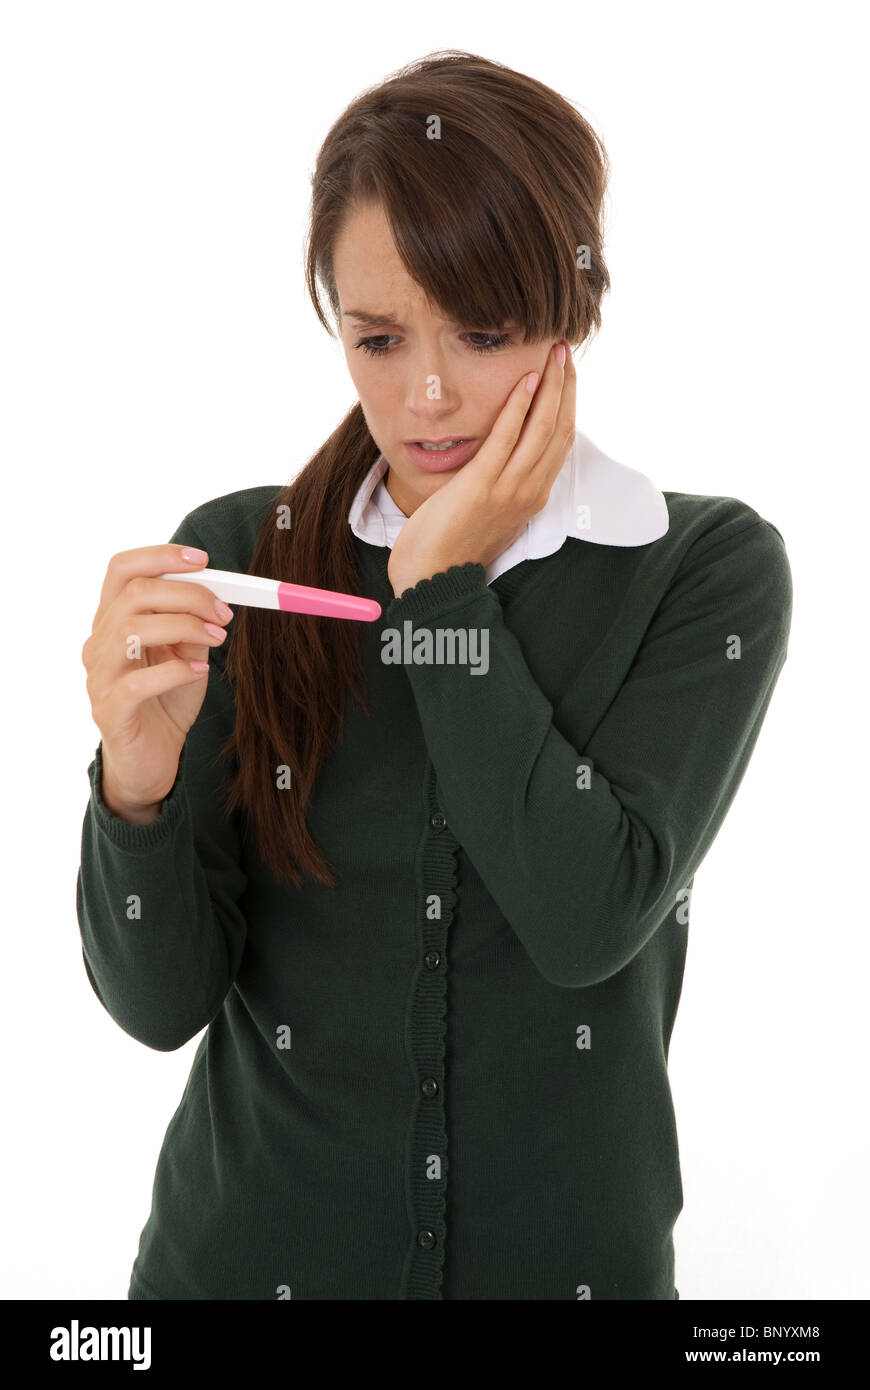 Shocked pregnancy result for a young school girl Stock Photo